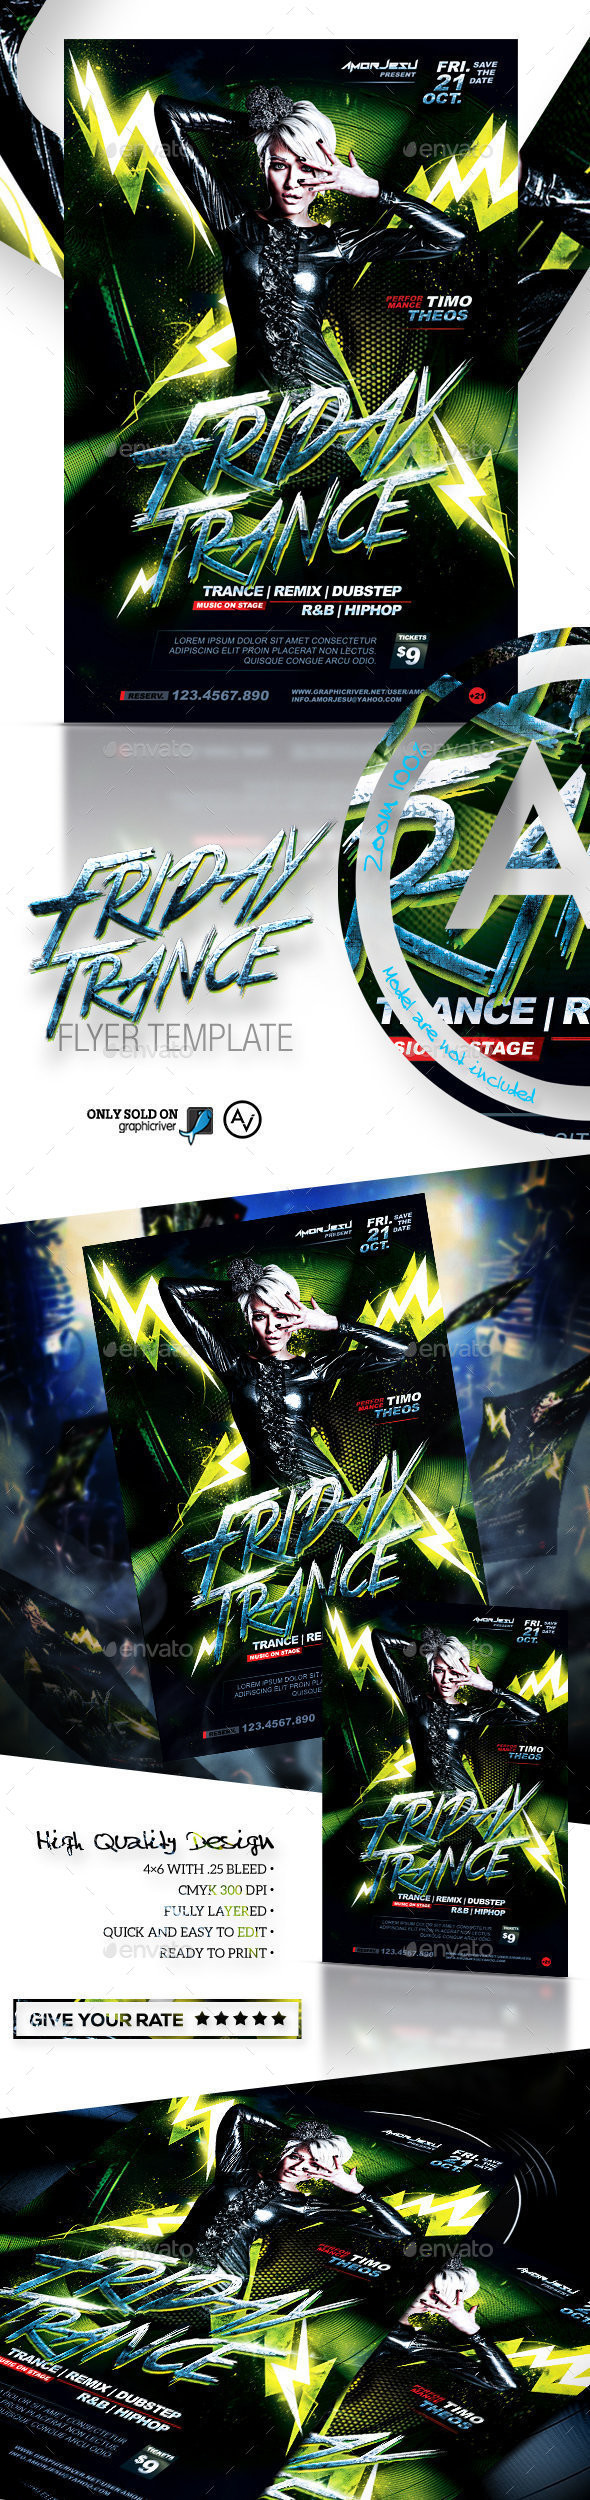 Preview 20  20friday 20trance 20flyer 20template 20 design 20by 20amorjesu 